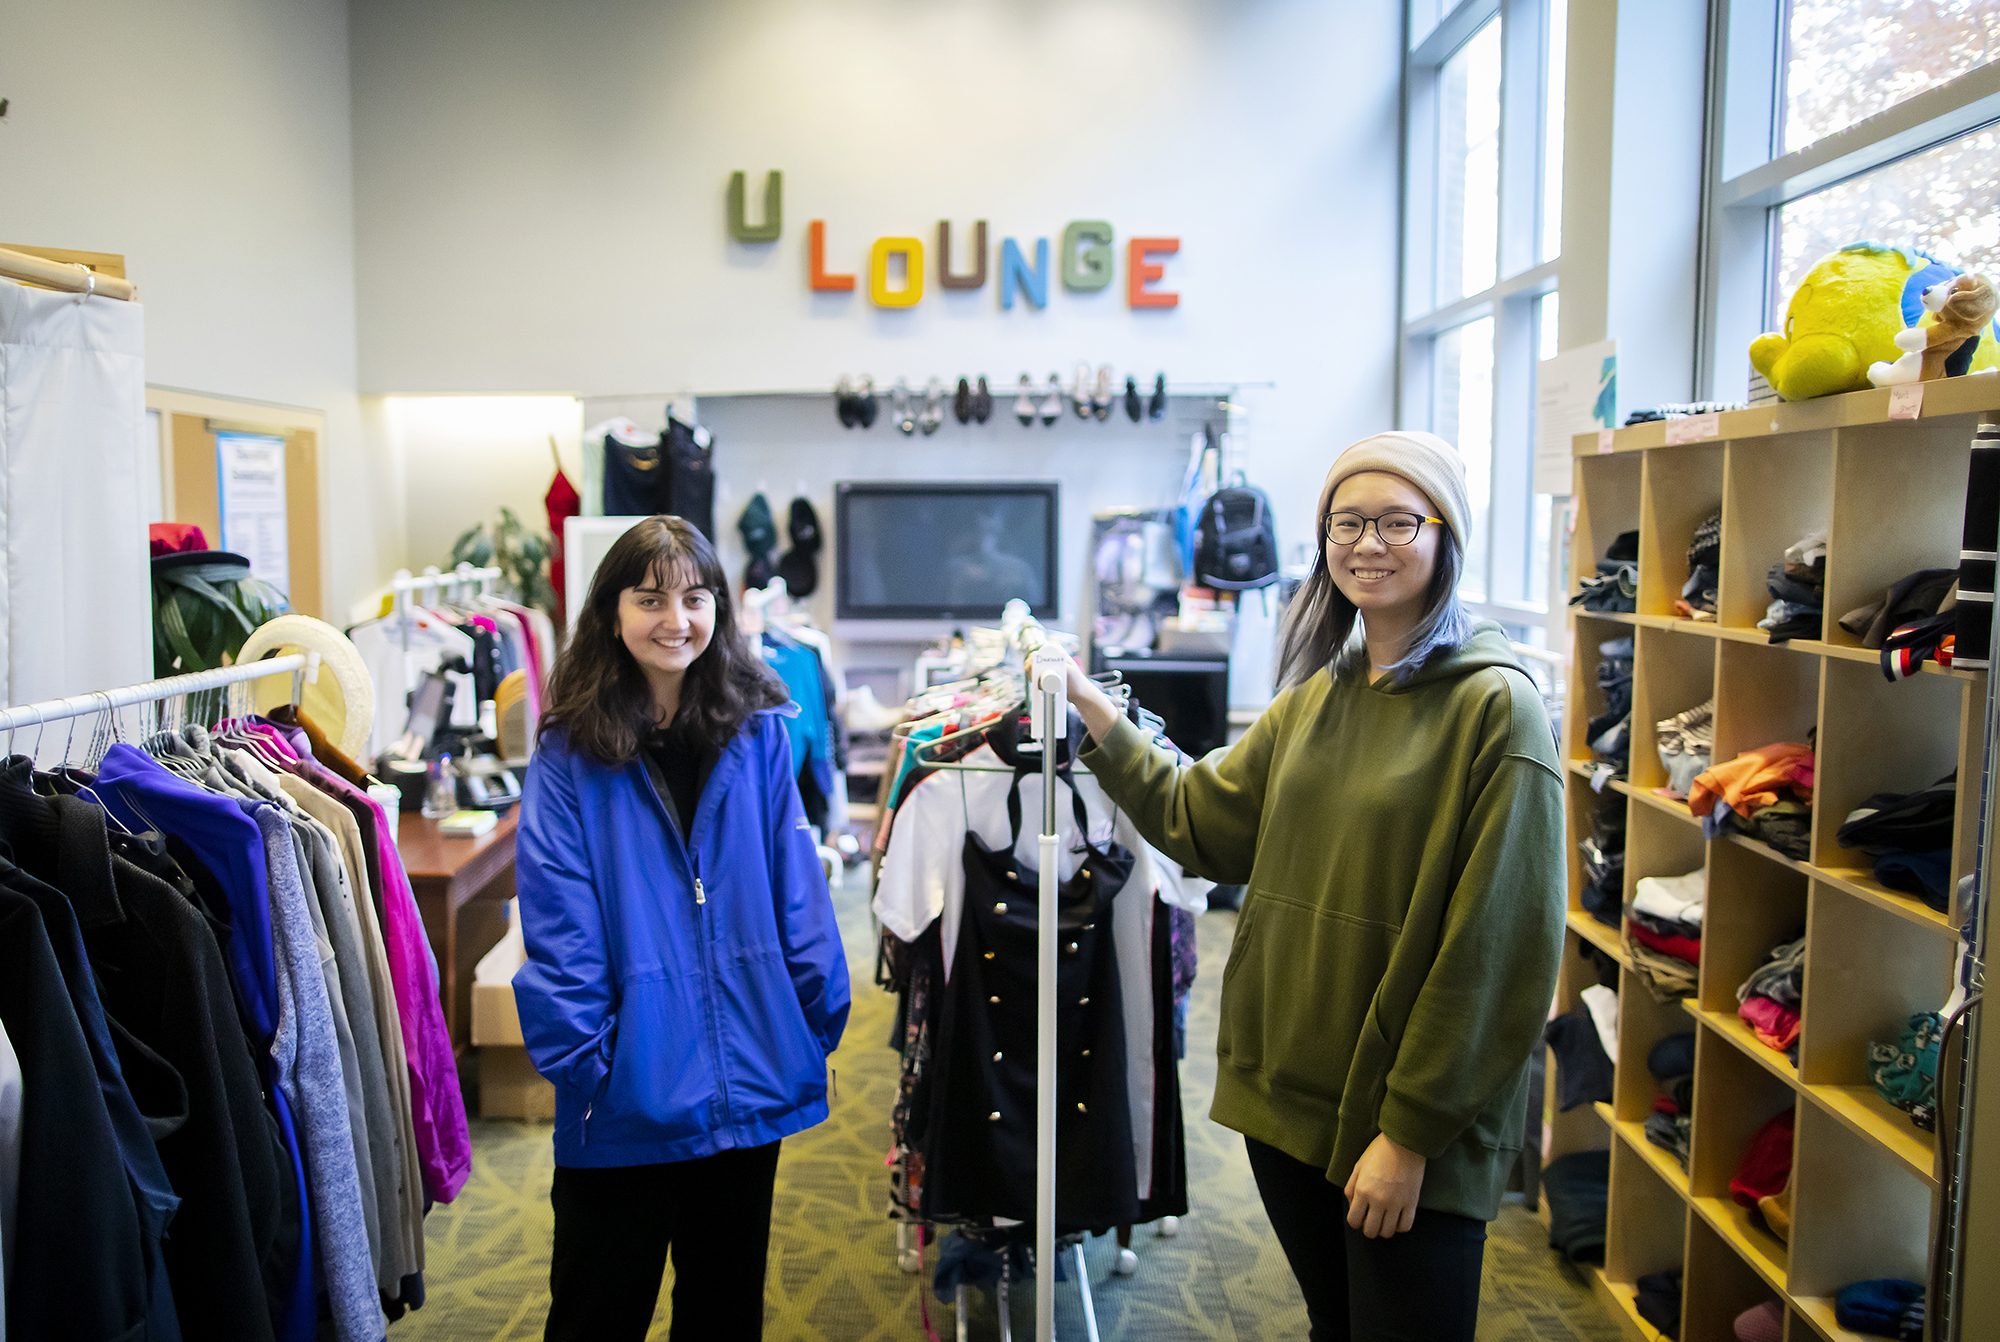 Two people standing bewteen two clothing racks in a crowded thrift shop space. On the back wall, the word "U Lounge" hangs in brightly colored block letters.